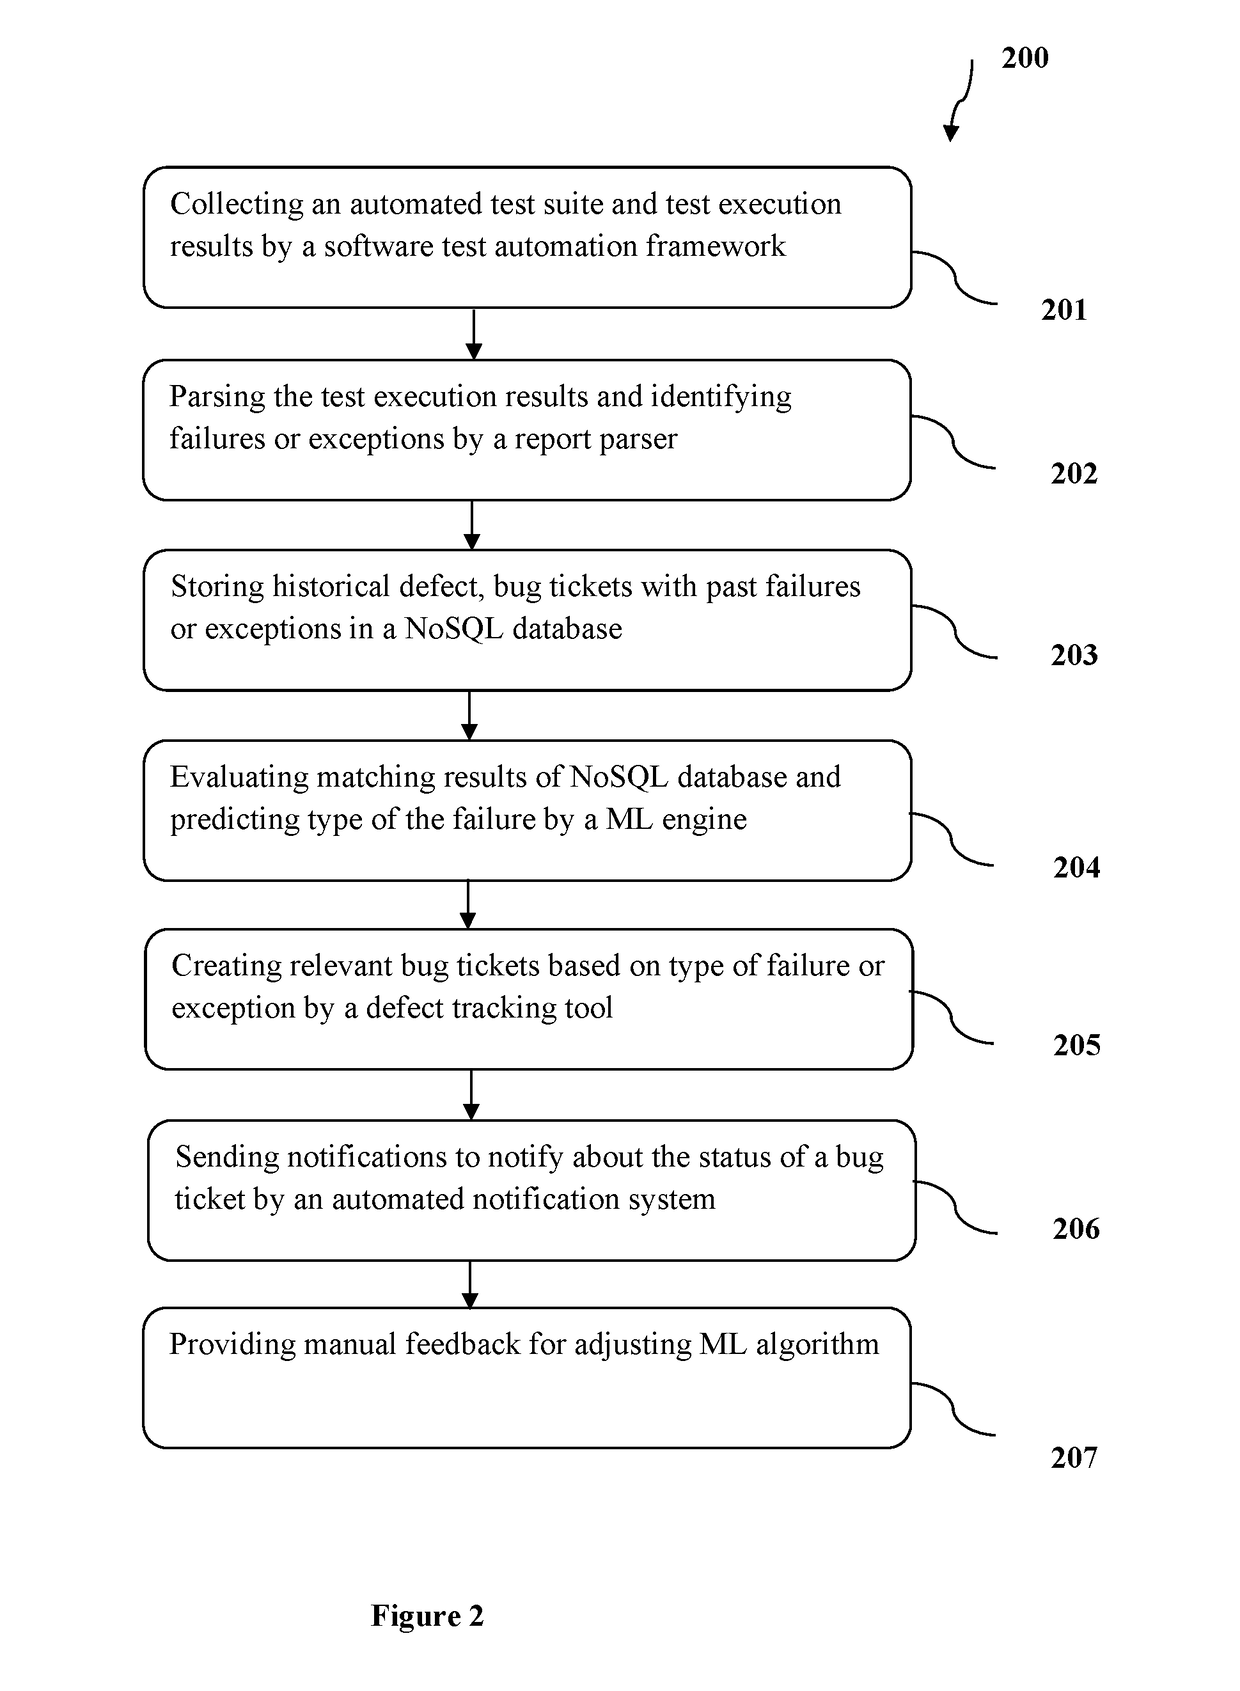 System and method for automated software testing based on Machine Learning (ML)